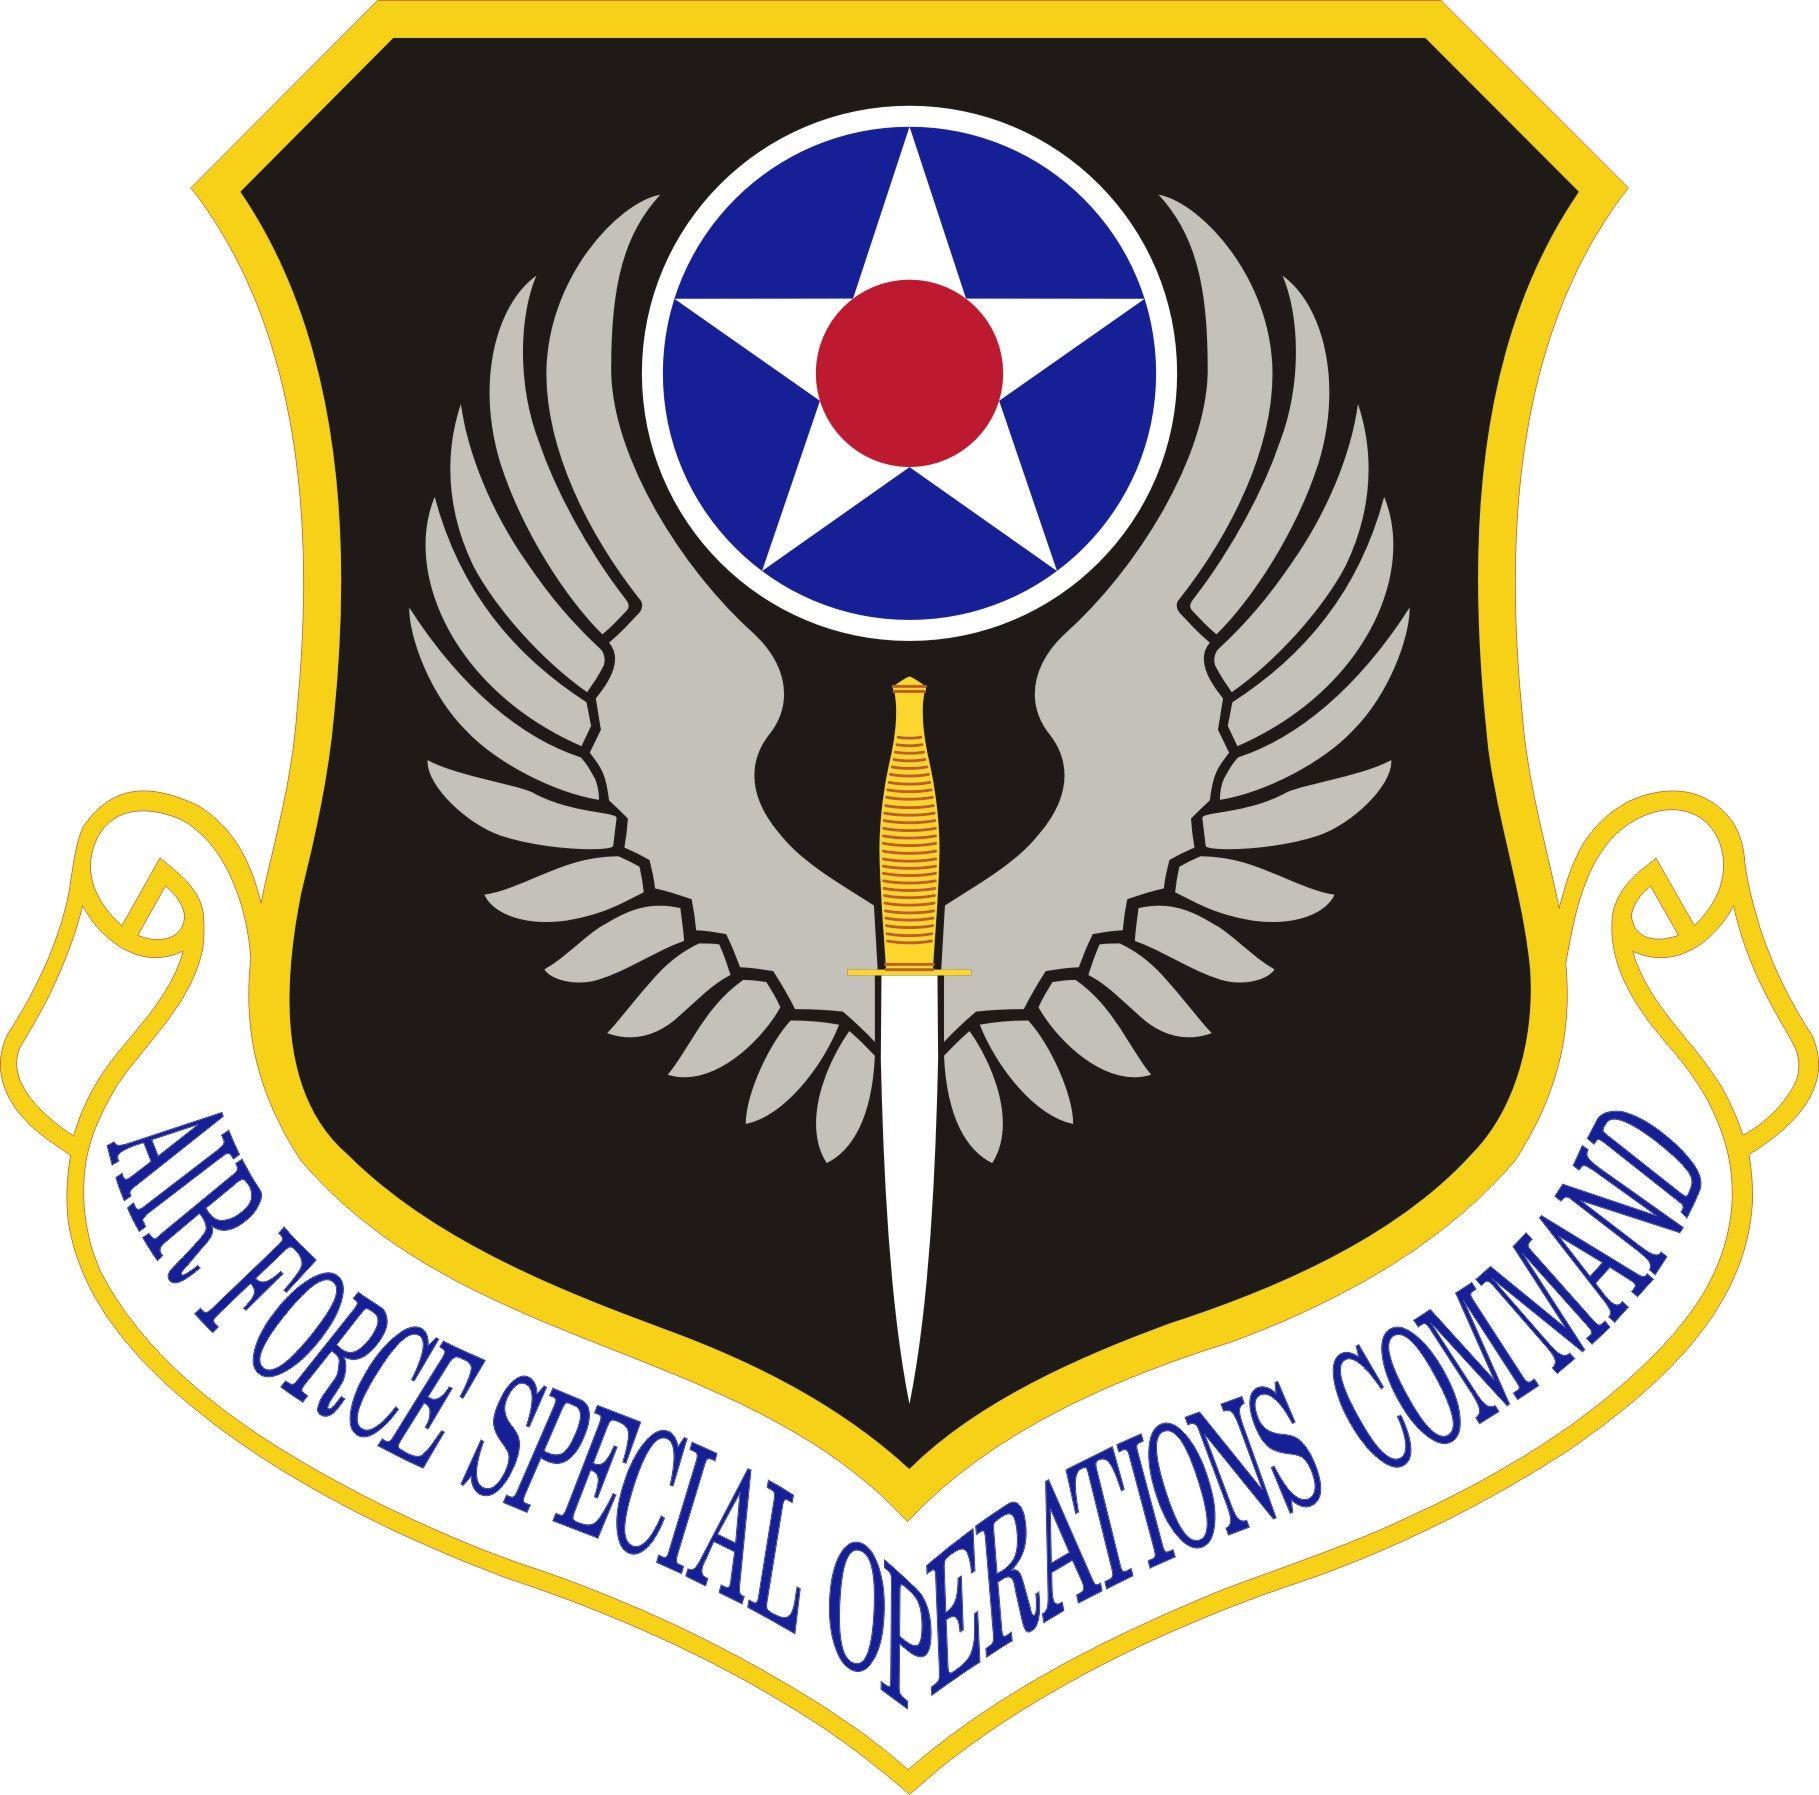 AFSOC Logo - History of AFSOC emblem > Air Force Special Operations Command > Display